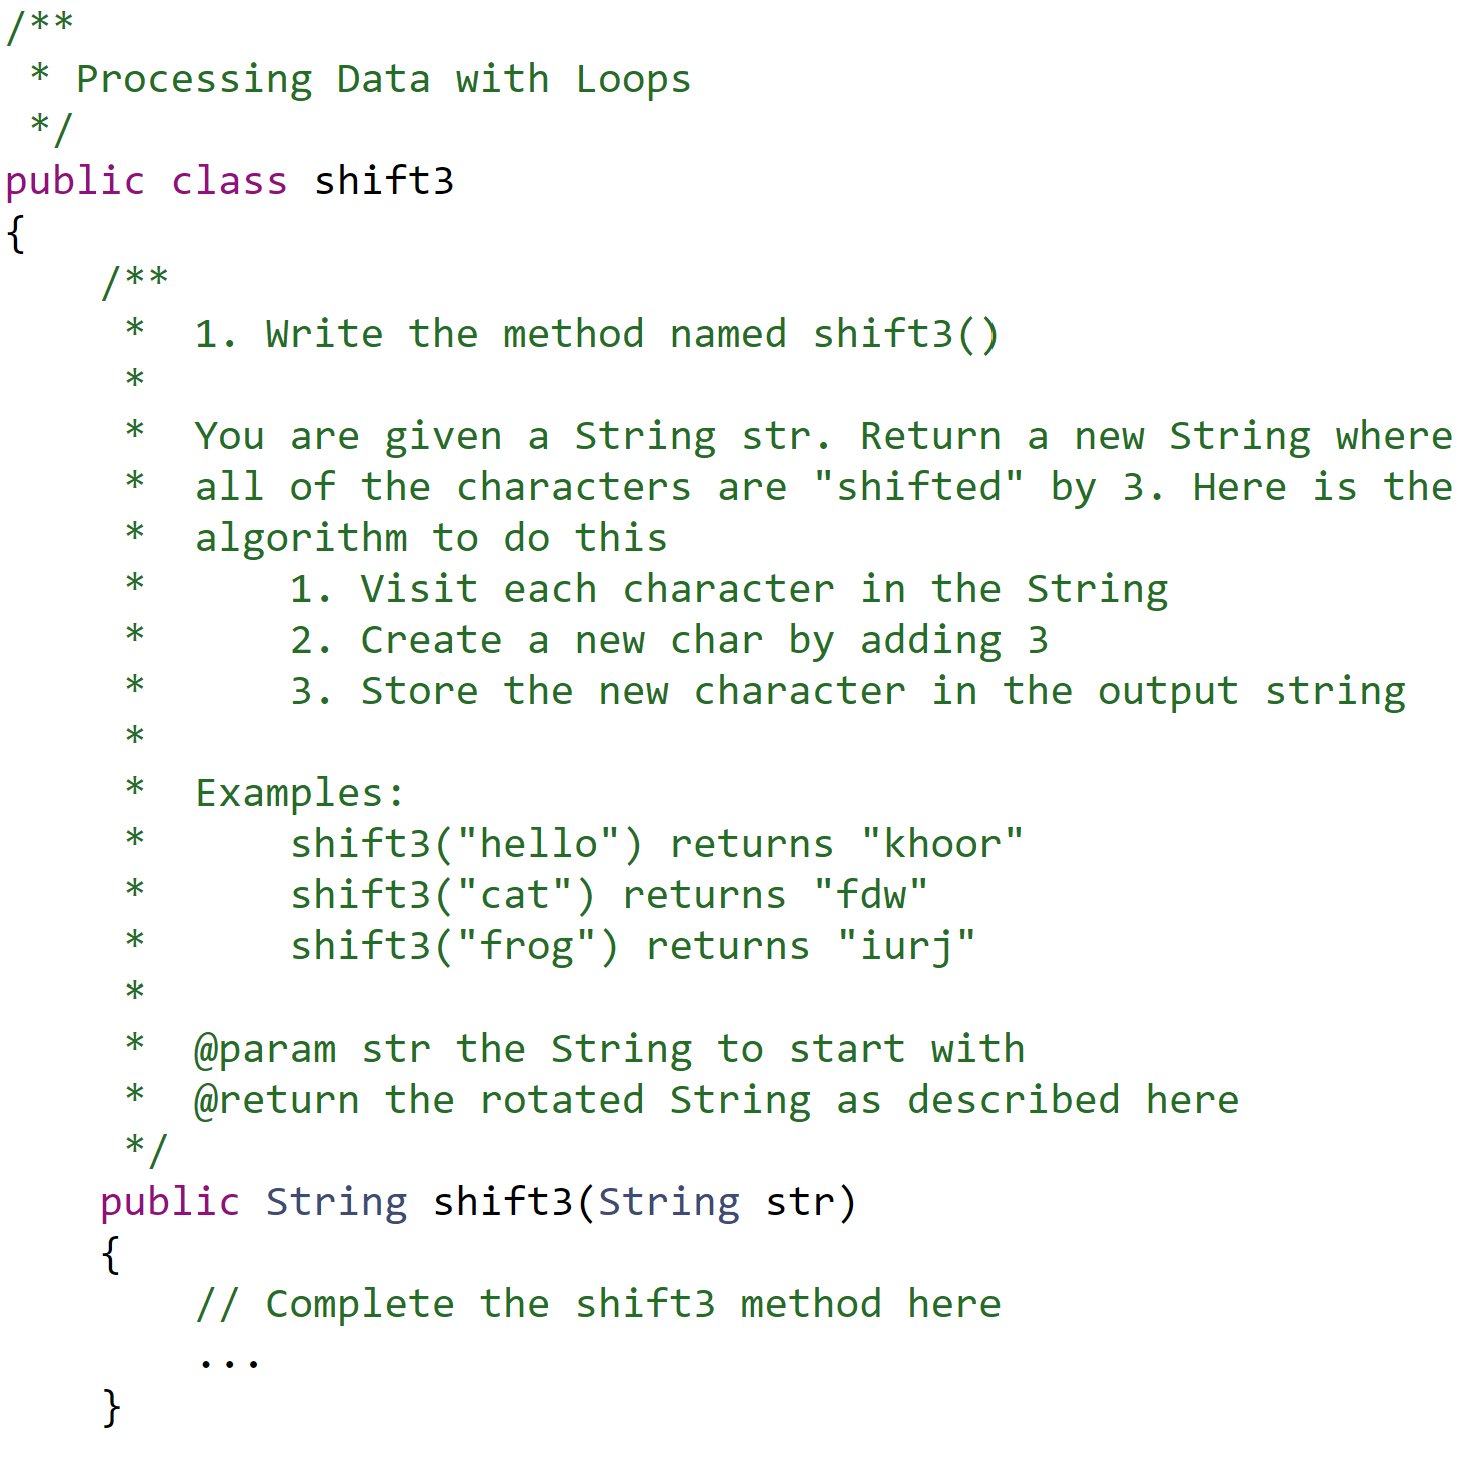 1. Write the method named shift3()
You are given a String str. Return a new String where
all of the characters are "shifted" by 3. Here is the
algorithm to do this
1. Visit each character in the String
2. Create a new char by adding 3
3. Store the new character in the output string
Examples:
shift3("hello") returns "khoor"
shift3("cat") returns "fdw"
shift3("frog") returns "iurj"
@param str the String to start with
@return the rotated String as described here
